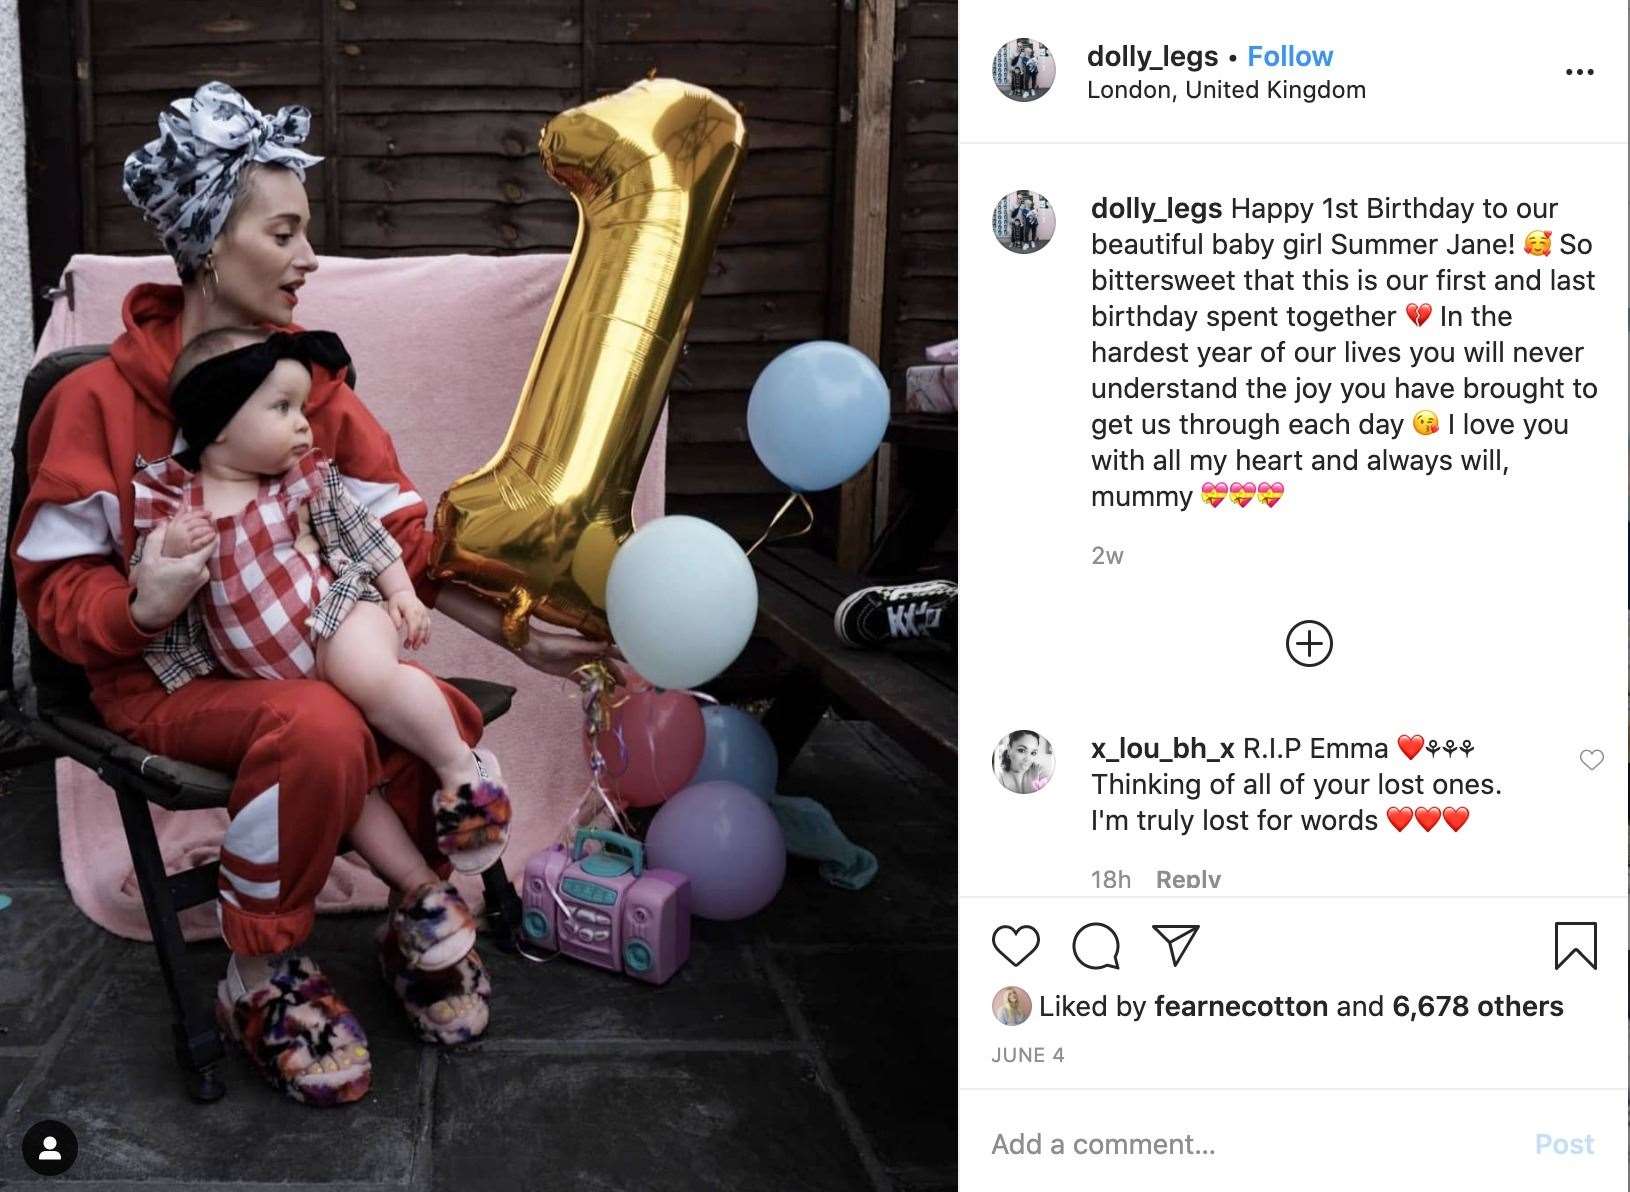 Emma shared this heartfelt message on her daughter's first birthday. Picture: Instagram @dolly_legs